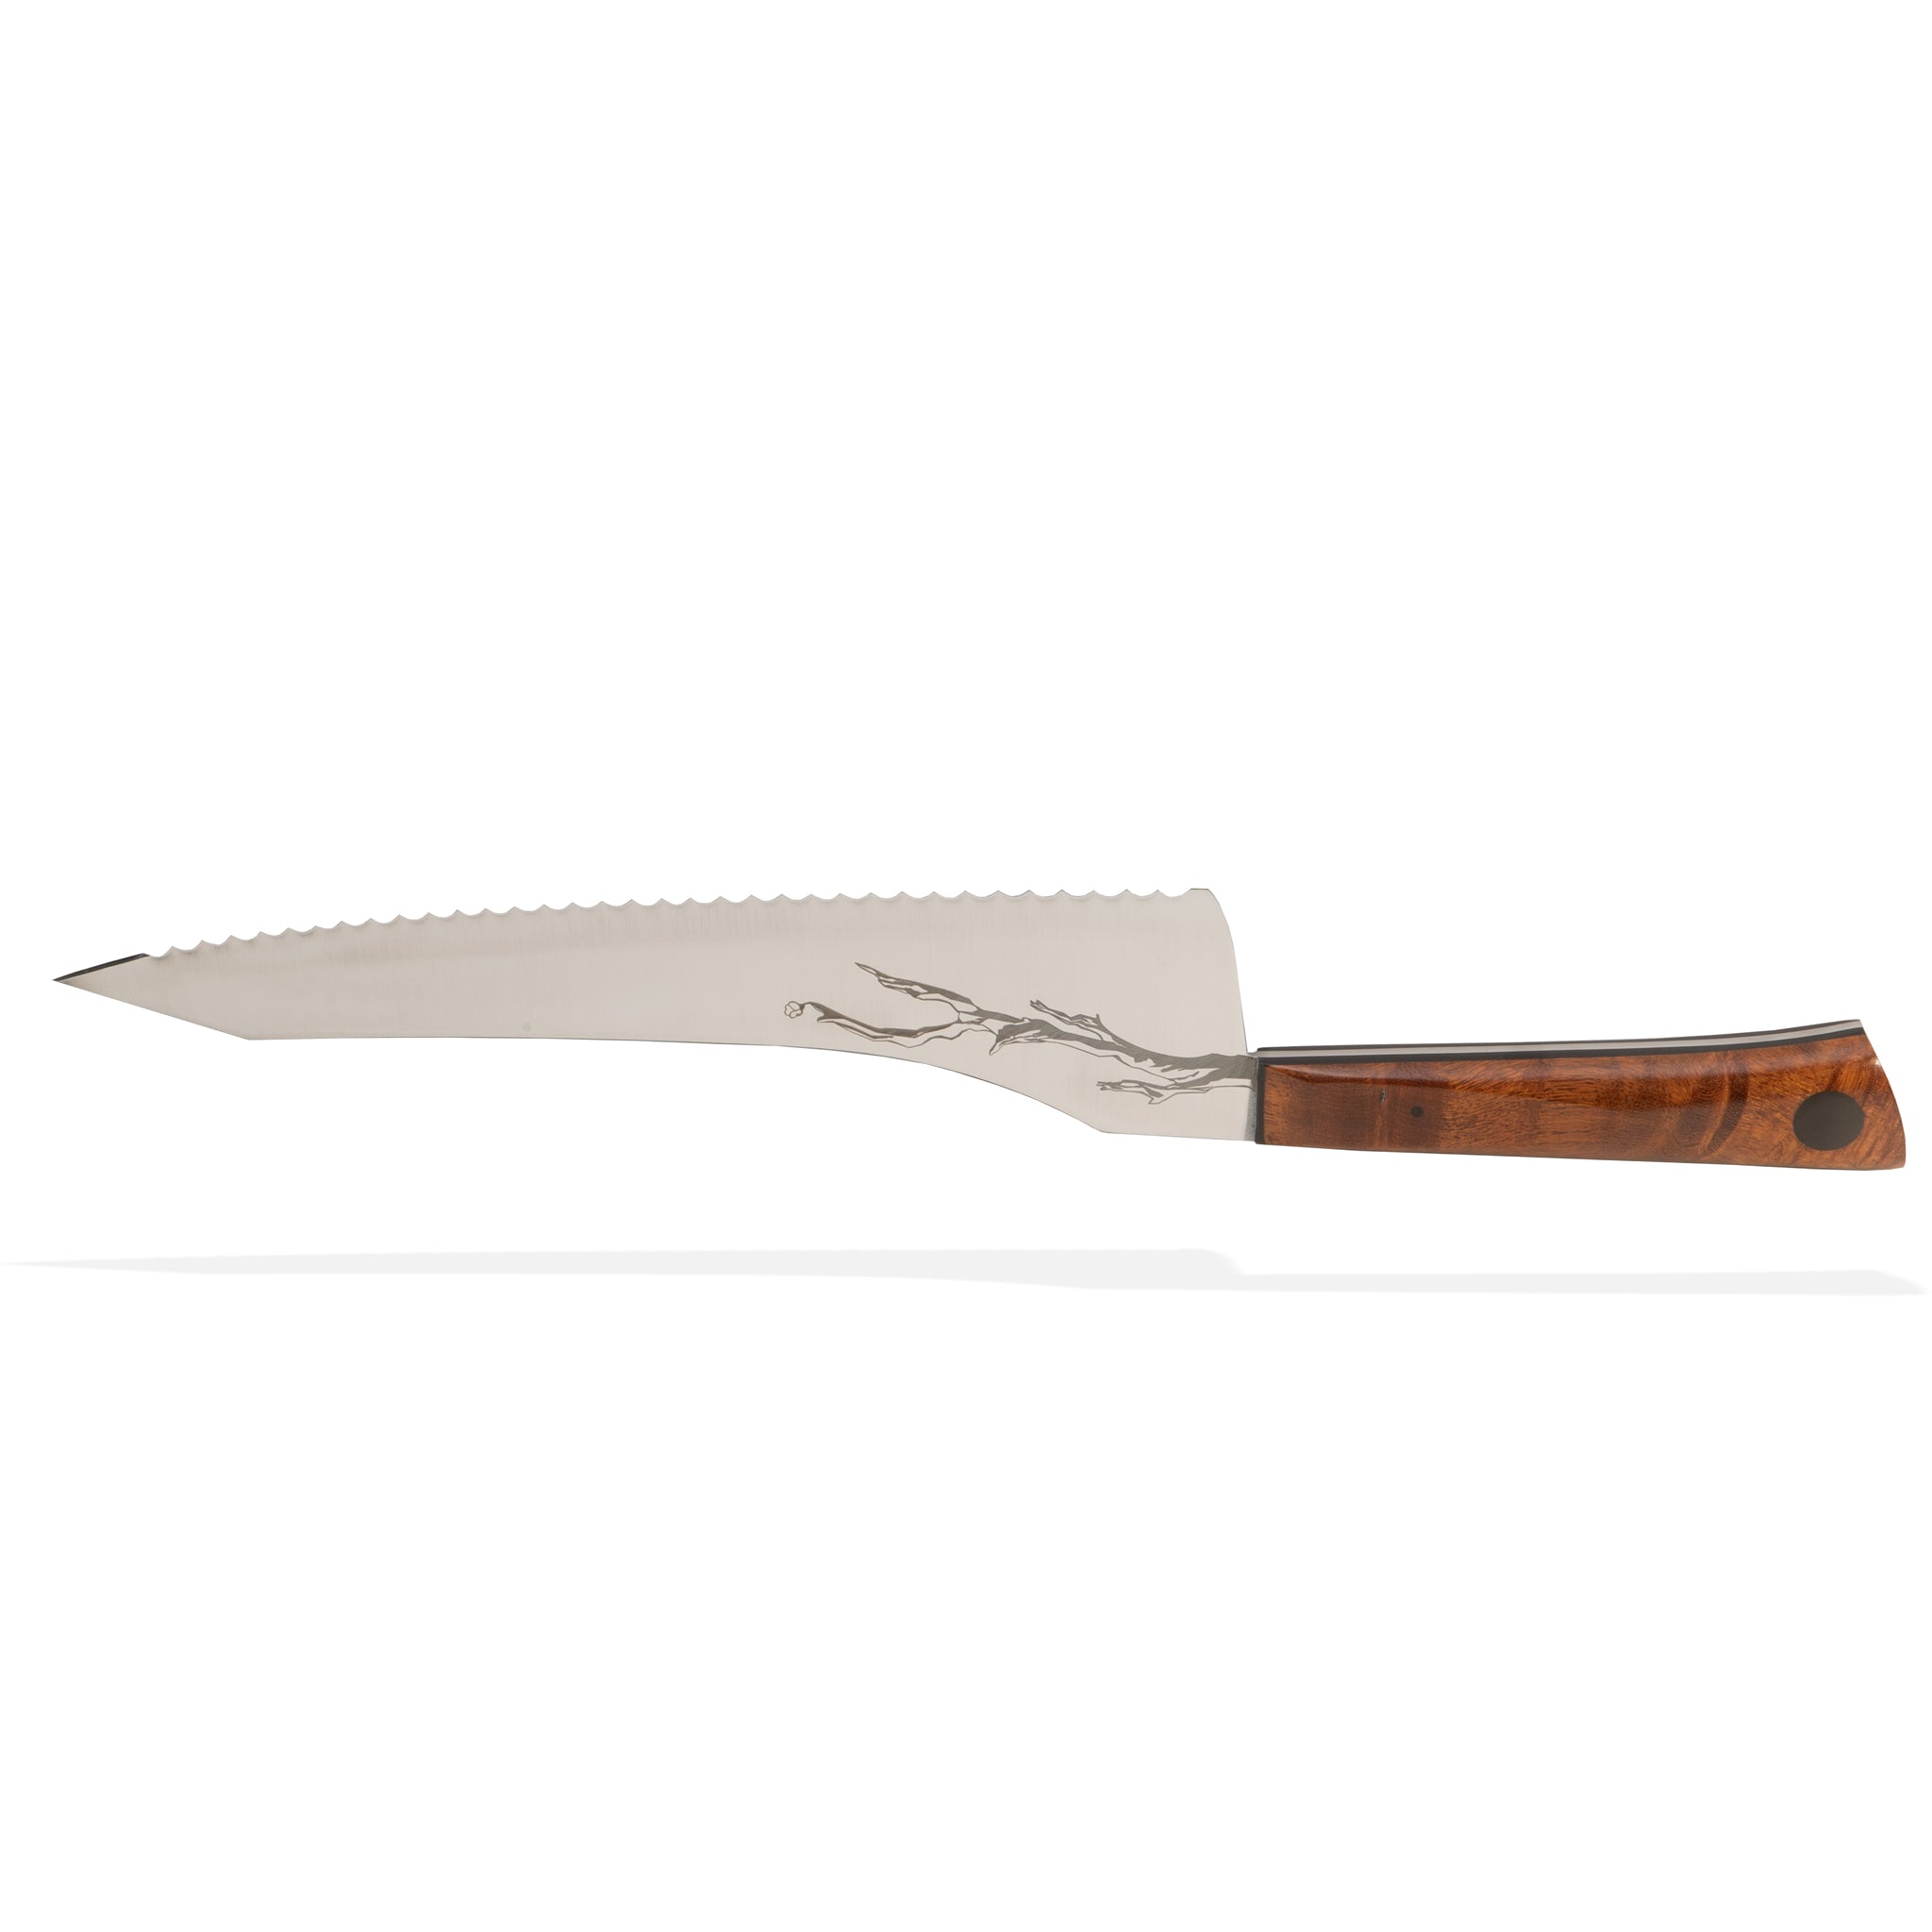 9" stainless steel bread knife by Town Cutler featuring Olneya Desert Ironwood handle gets you through bread and baked goods that are either crusty or soft without crushing the interior.